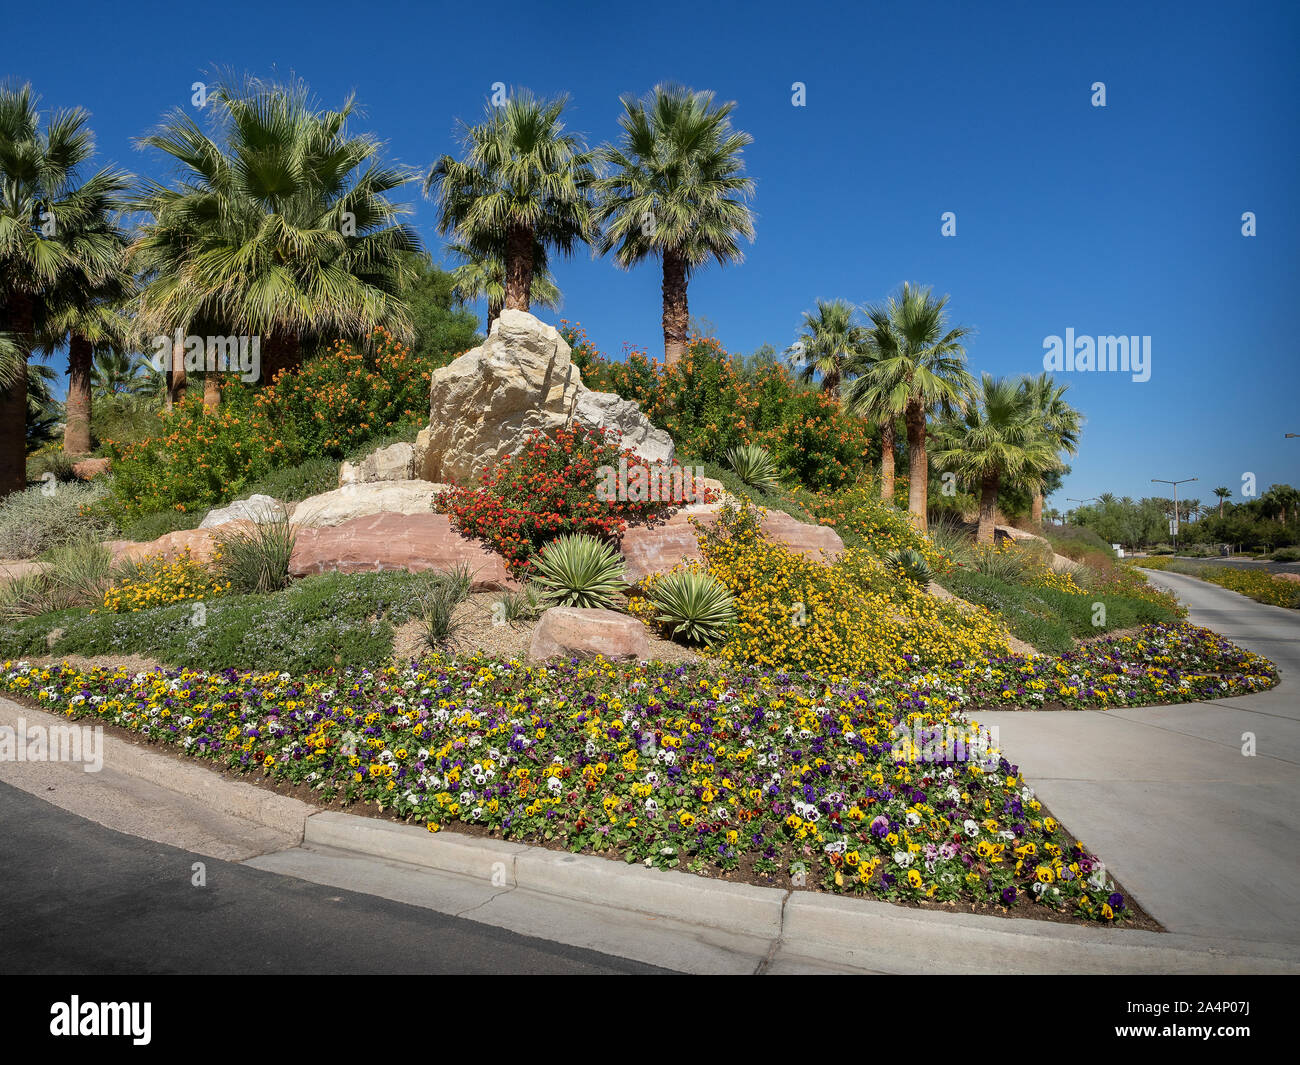 Manicured desert landscaping including palm trees, plants, flowers, Stock Photo